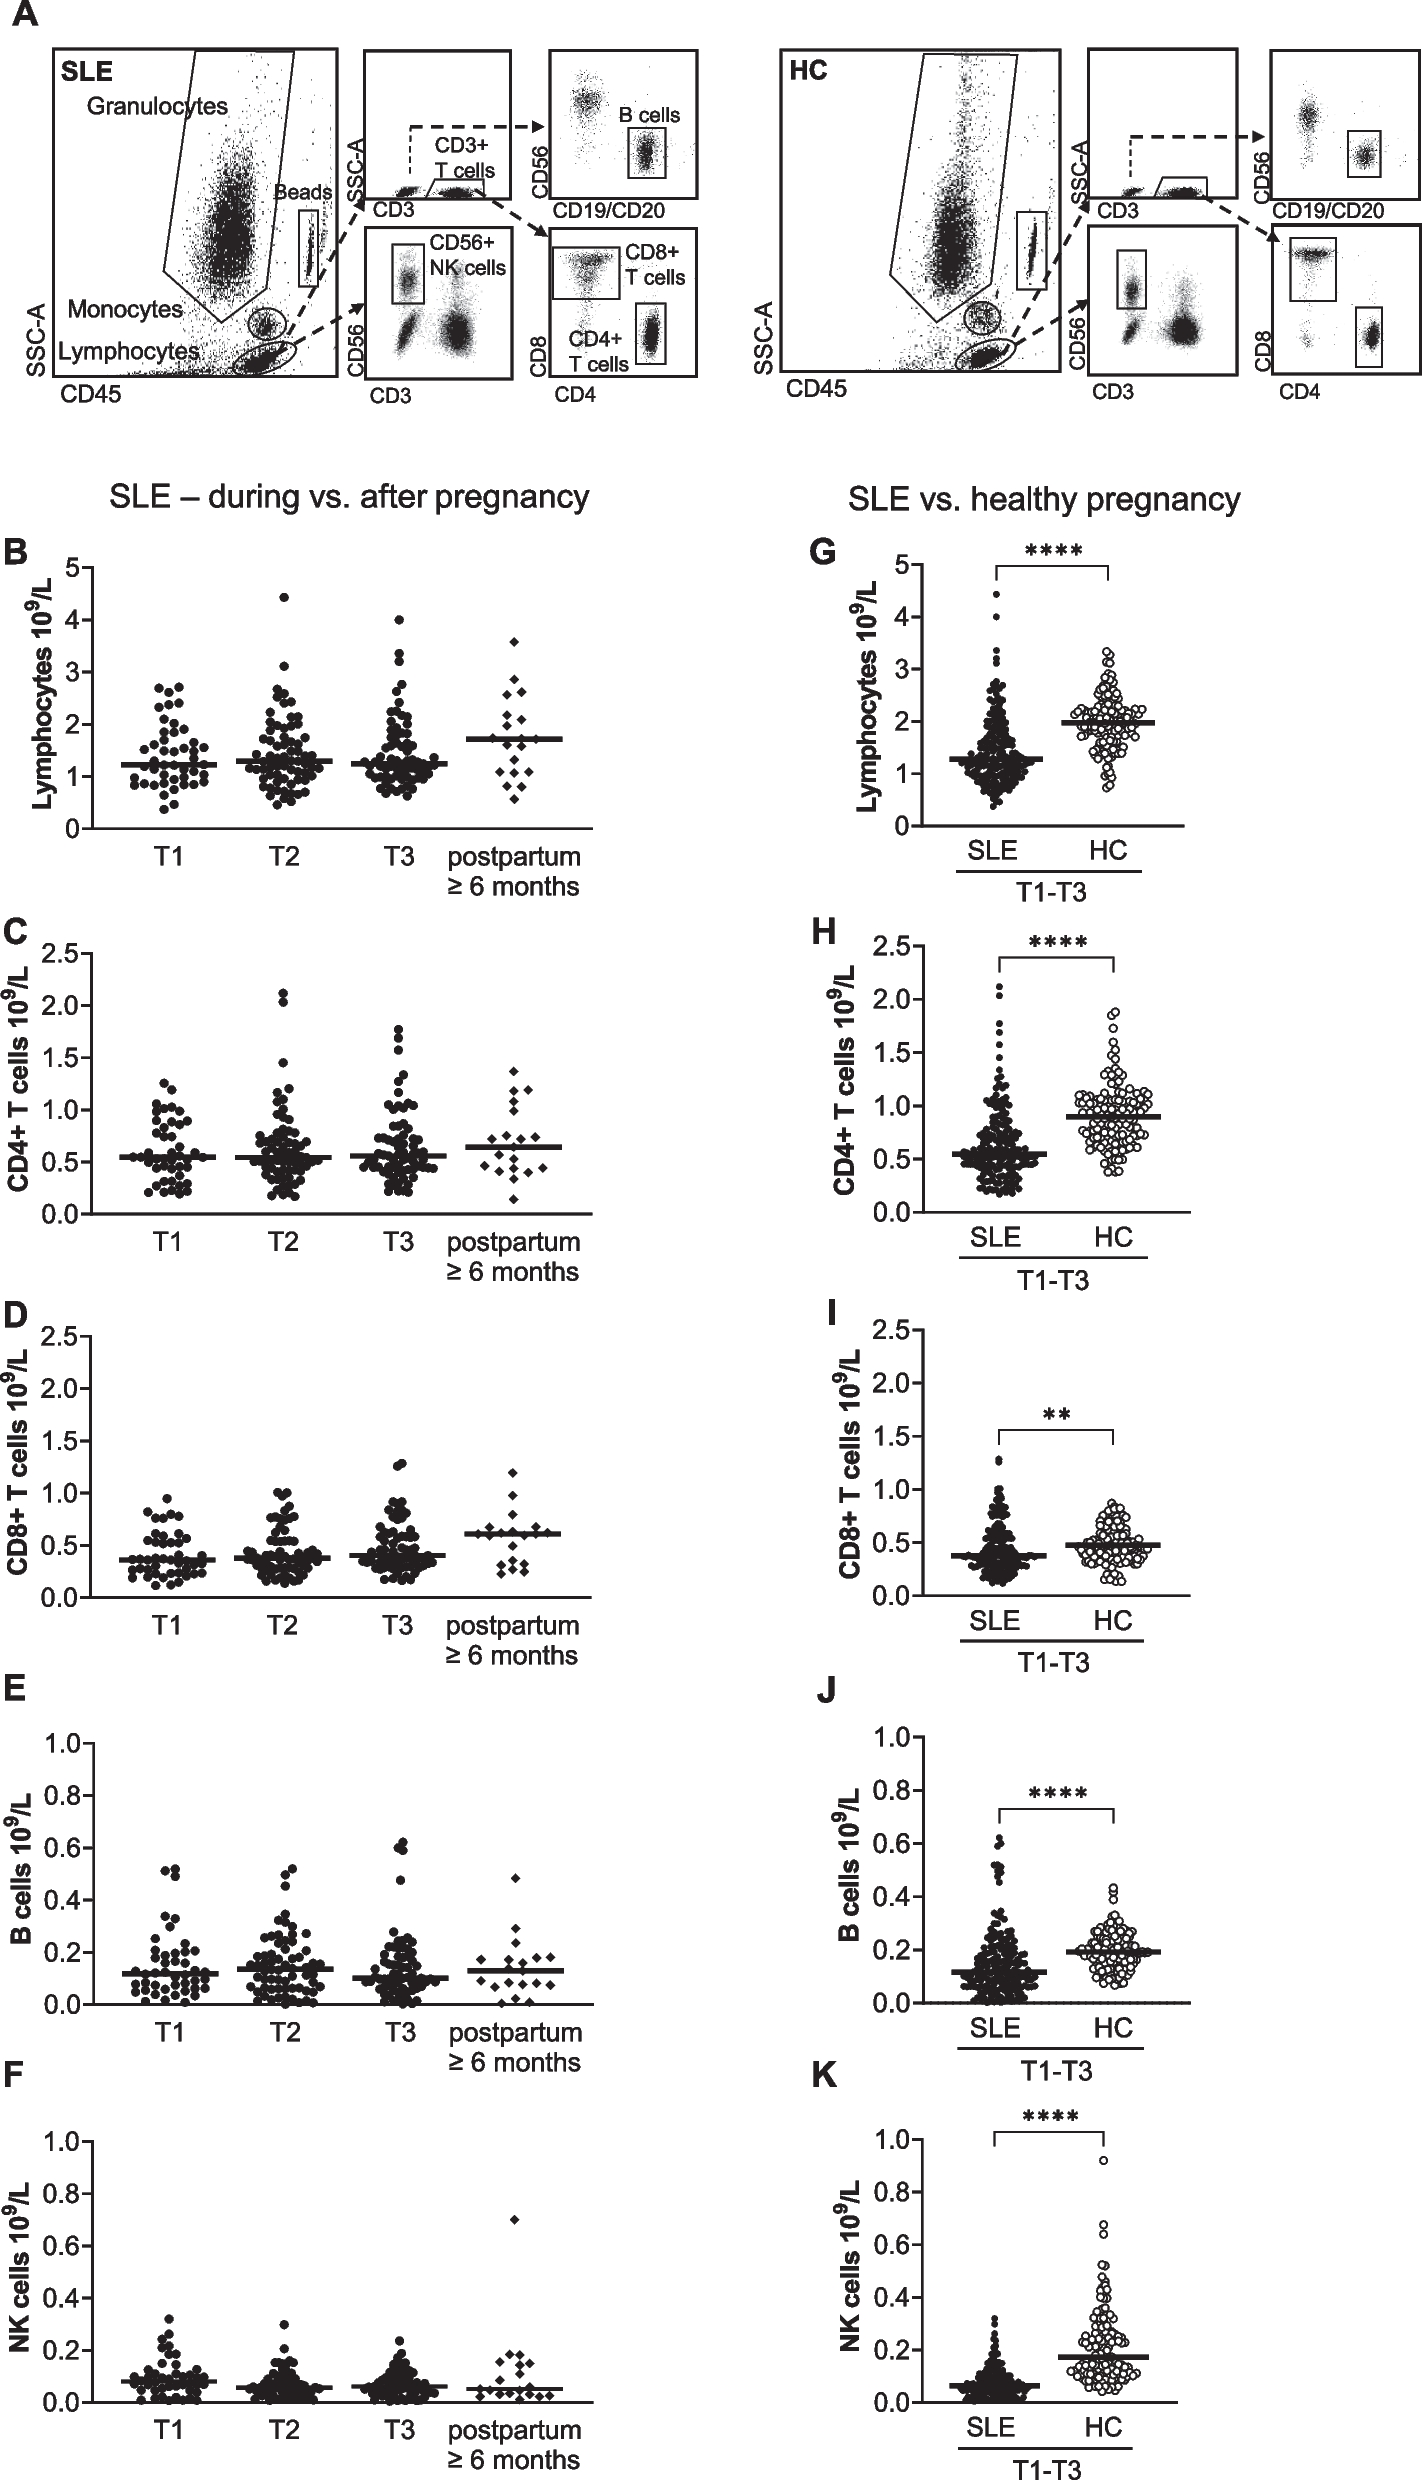 Low CD4 + T cell count is related to specific anti-nuclear antibodies, IFNα protein positivity and disease activity in systemic lupus erythematosus pregnancy